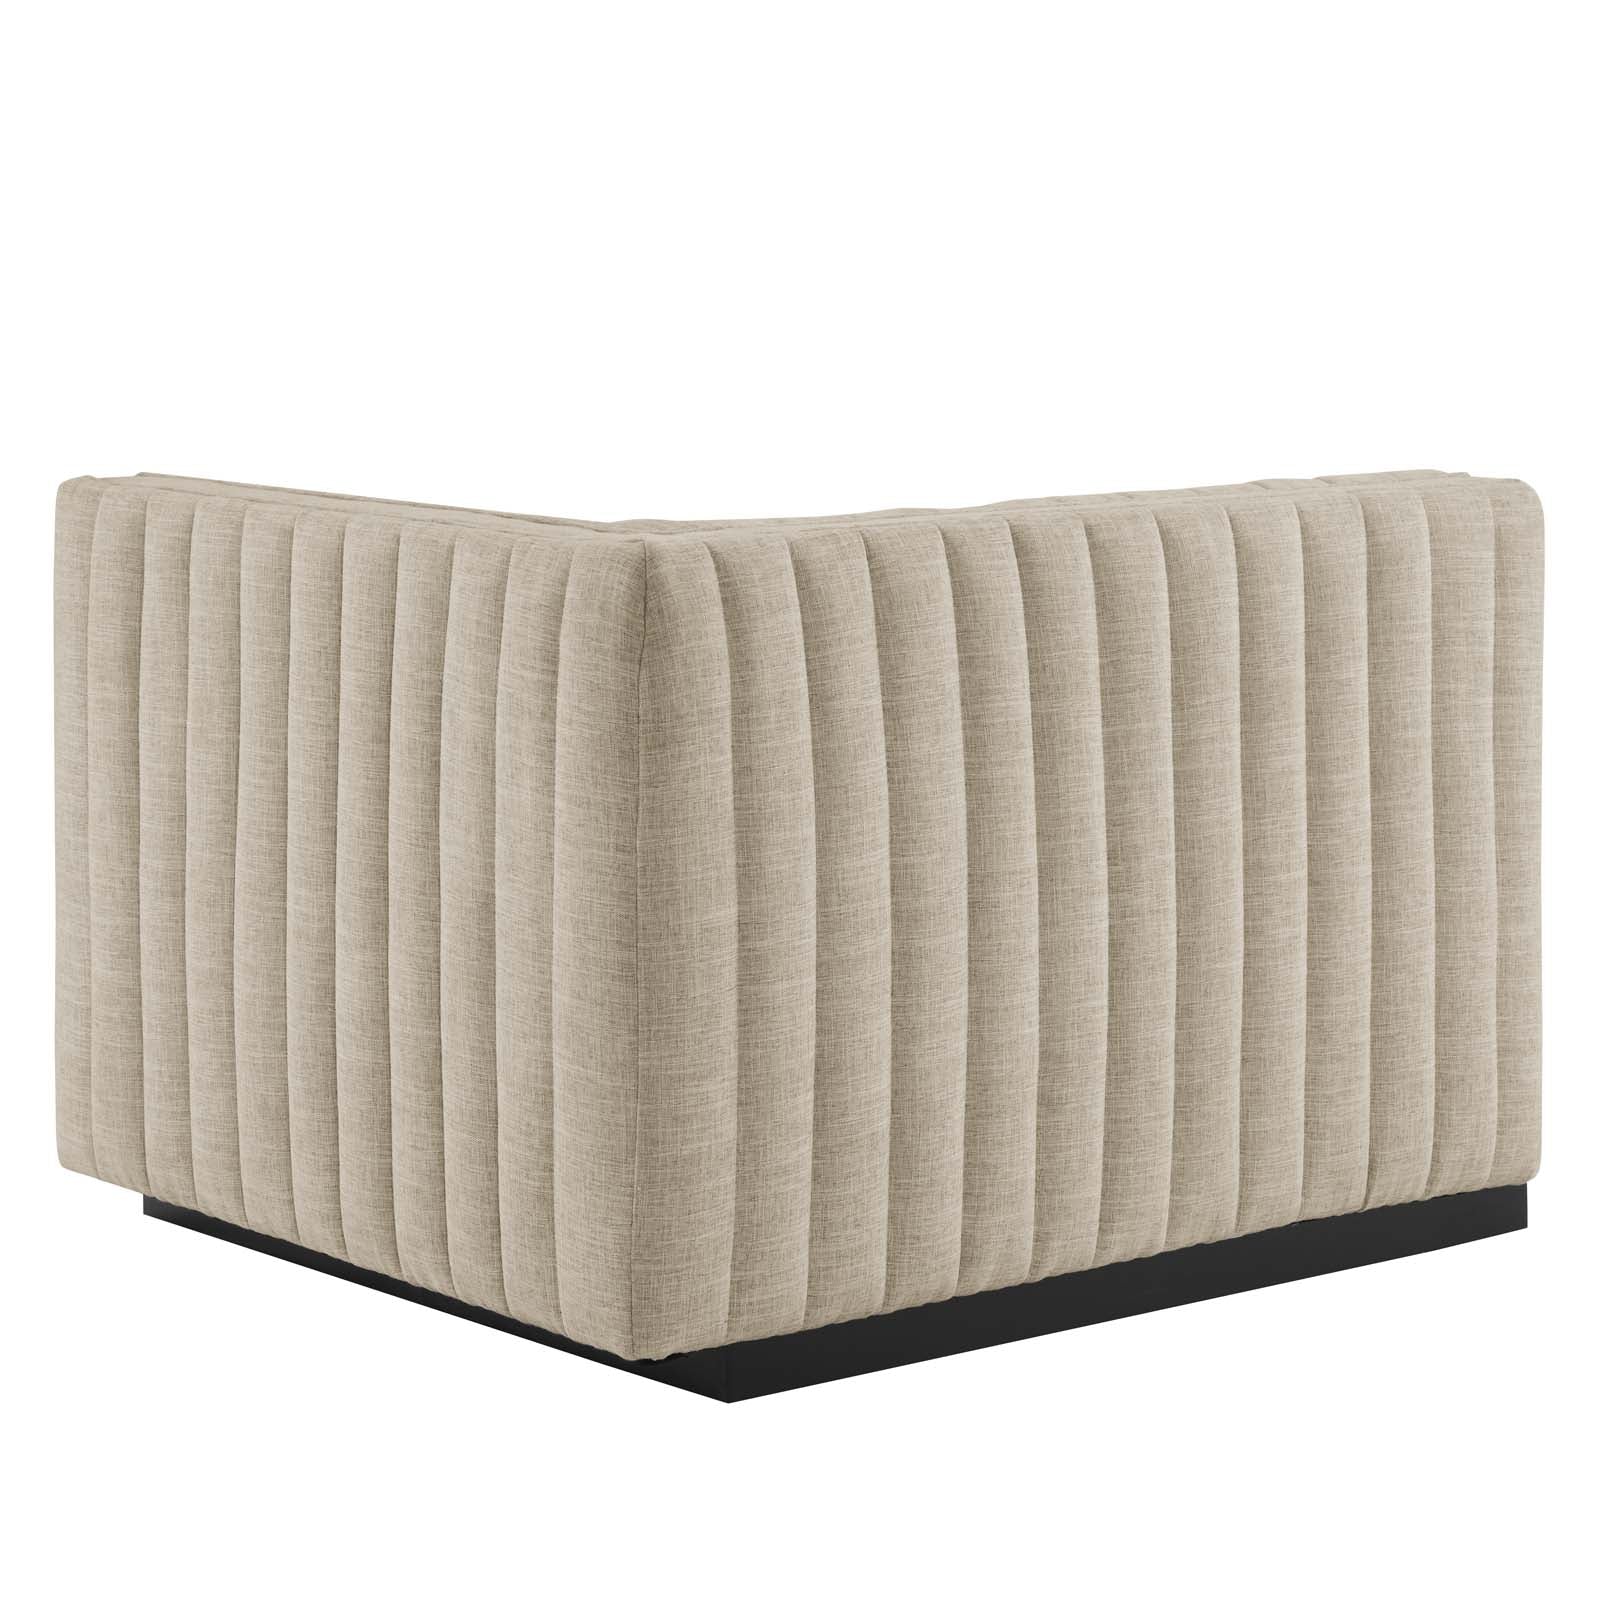 Conjure Channel Tufted Upholstered Fabric Right-Arm Chair - East Shore Modern Home Furnishings